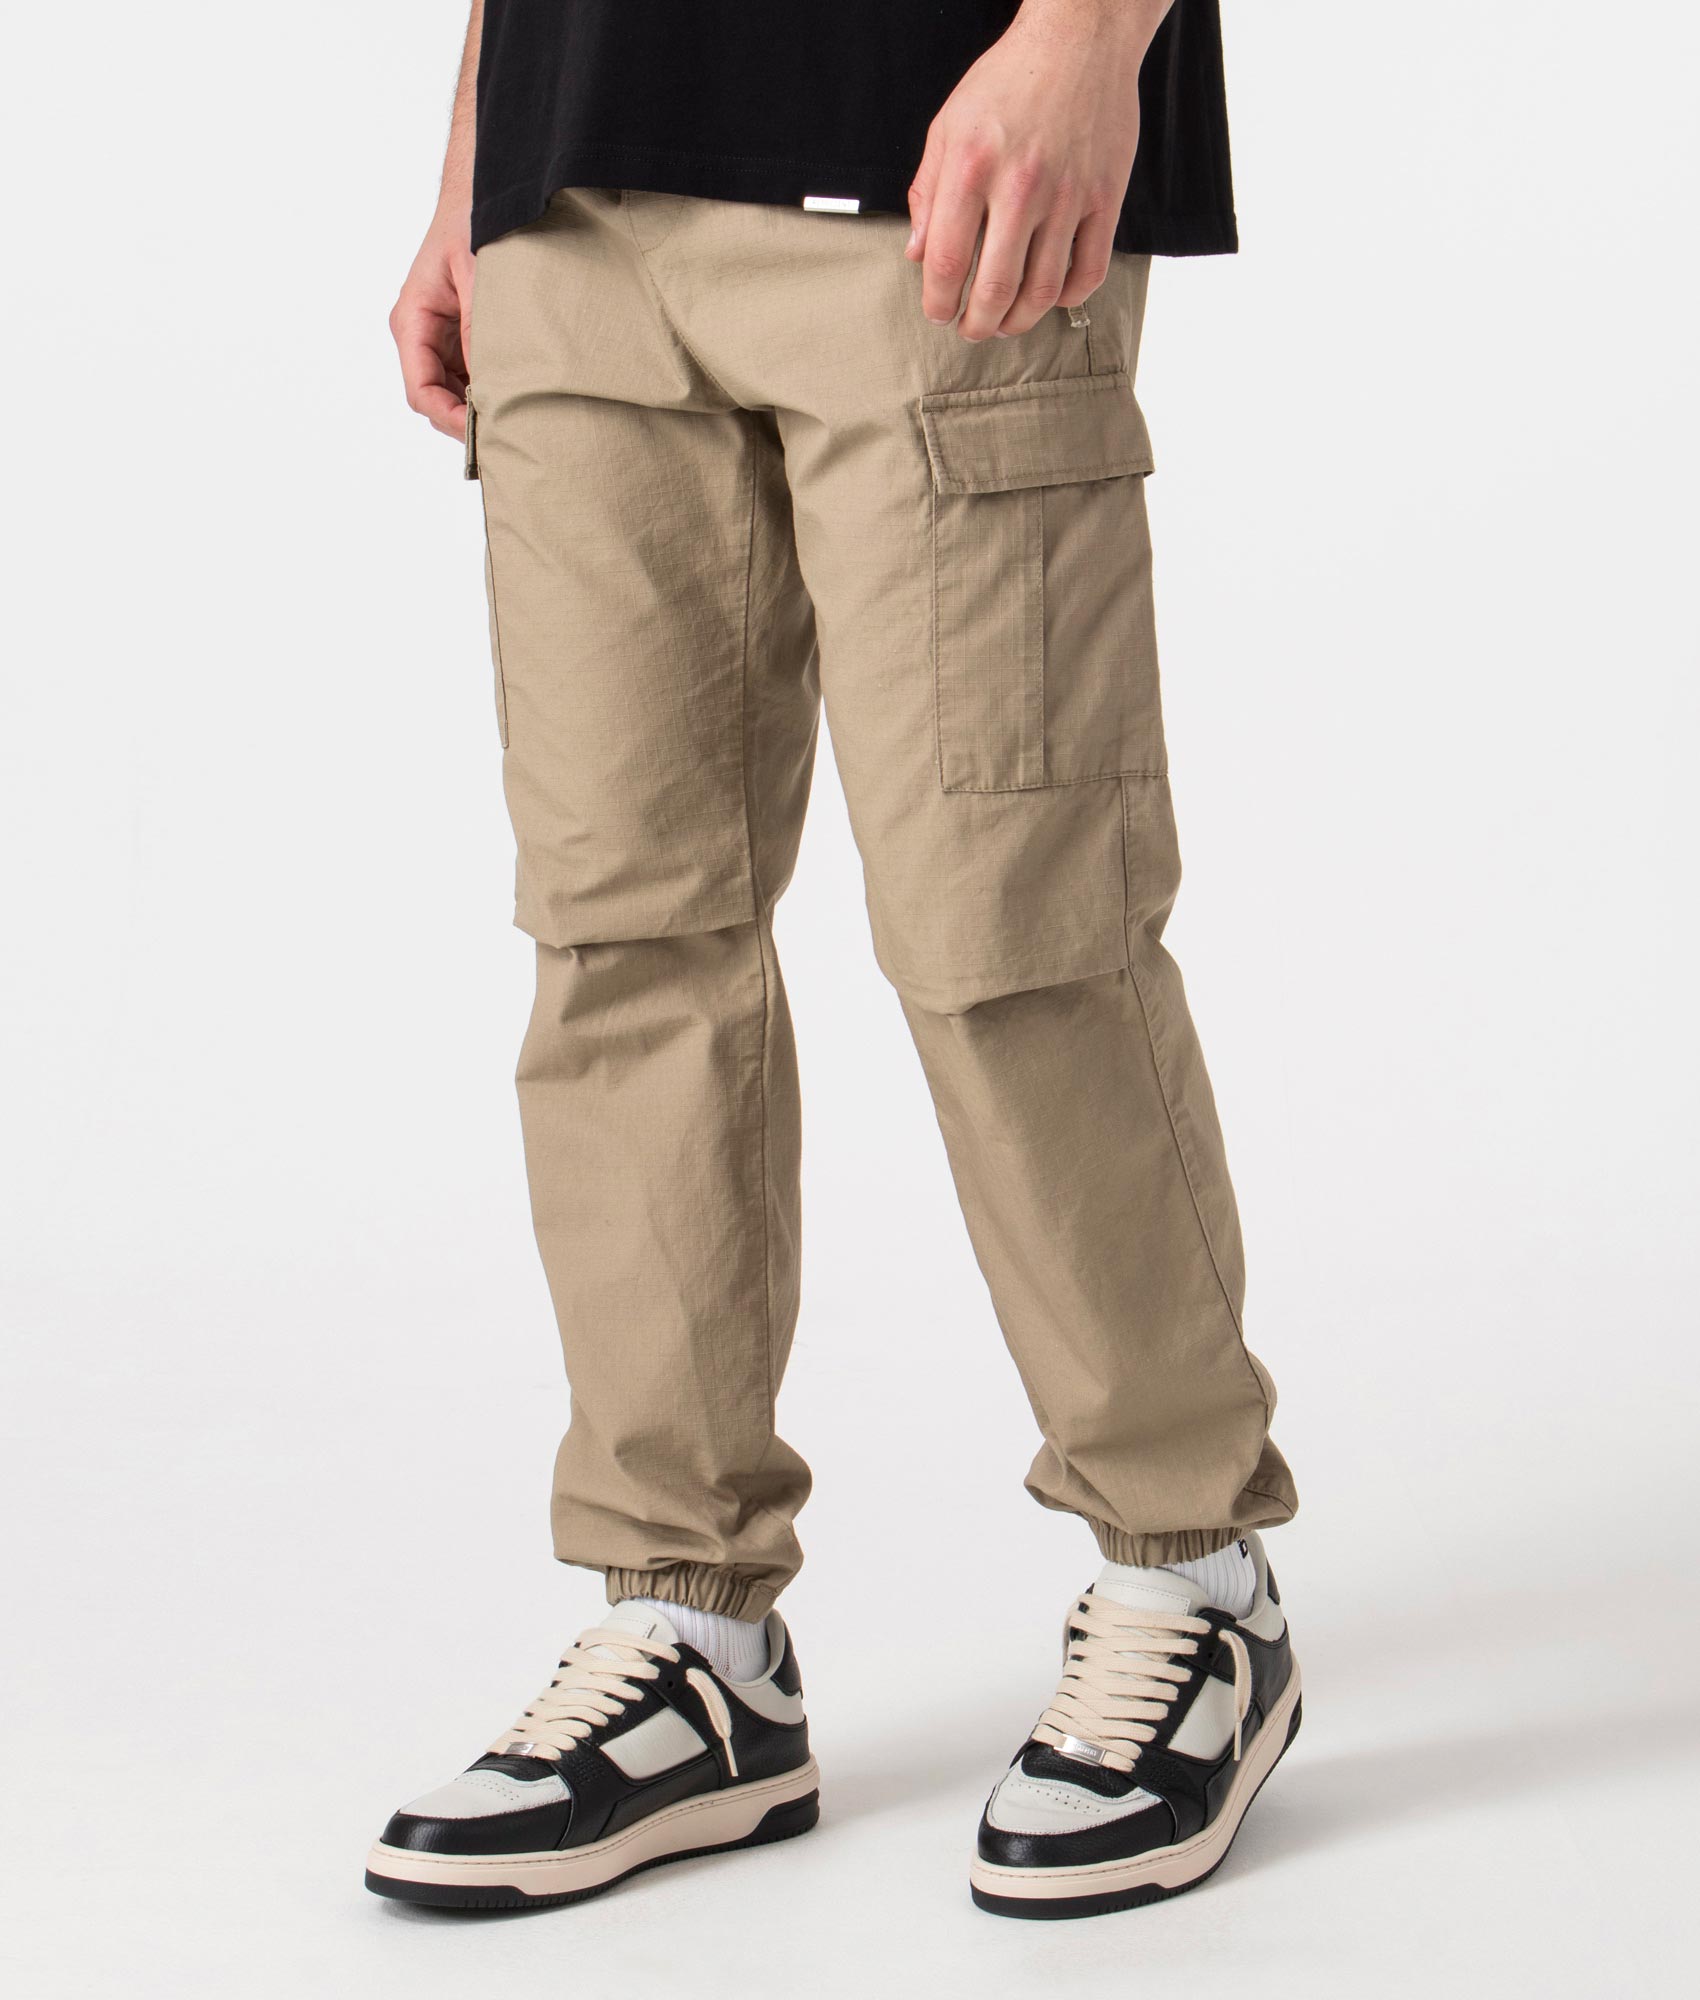 Carhartt WIP Mens Relaxed Fit Cargo Joggers - Colour: 8Y02 Leather Rinsed - Size: L/36W